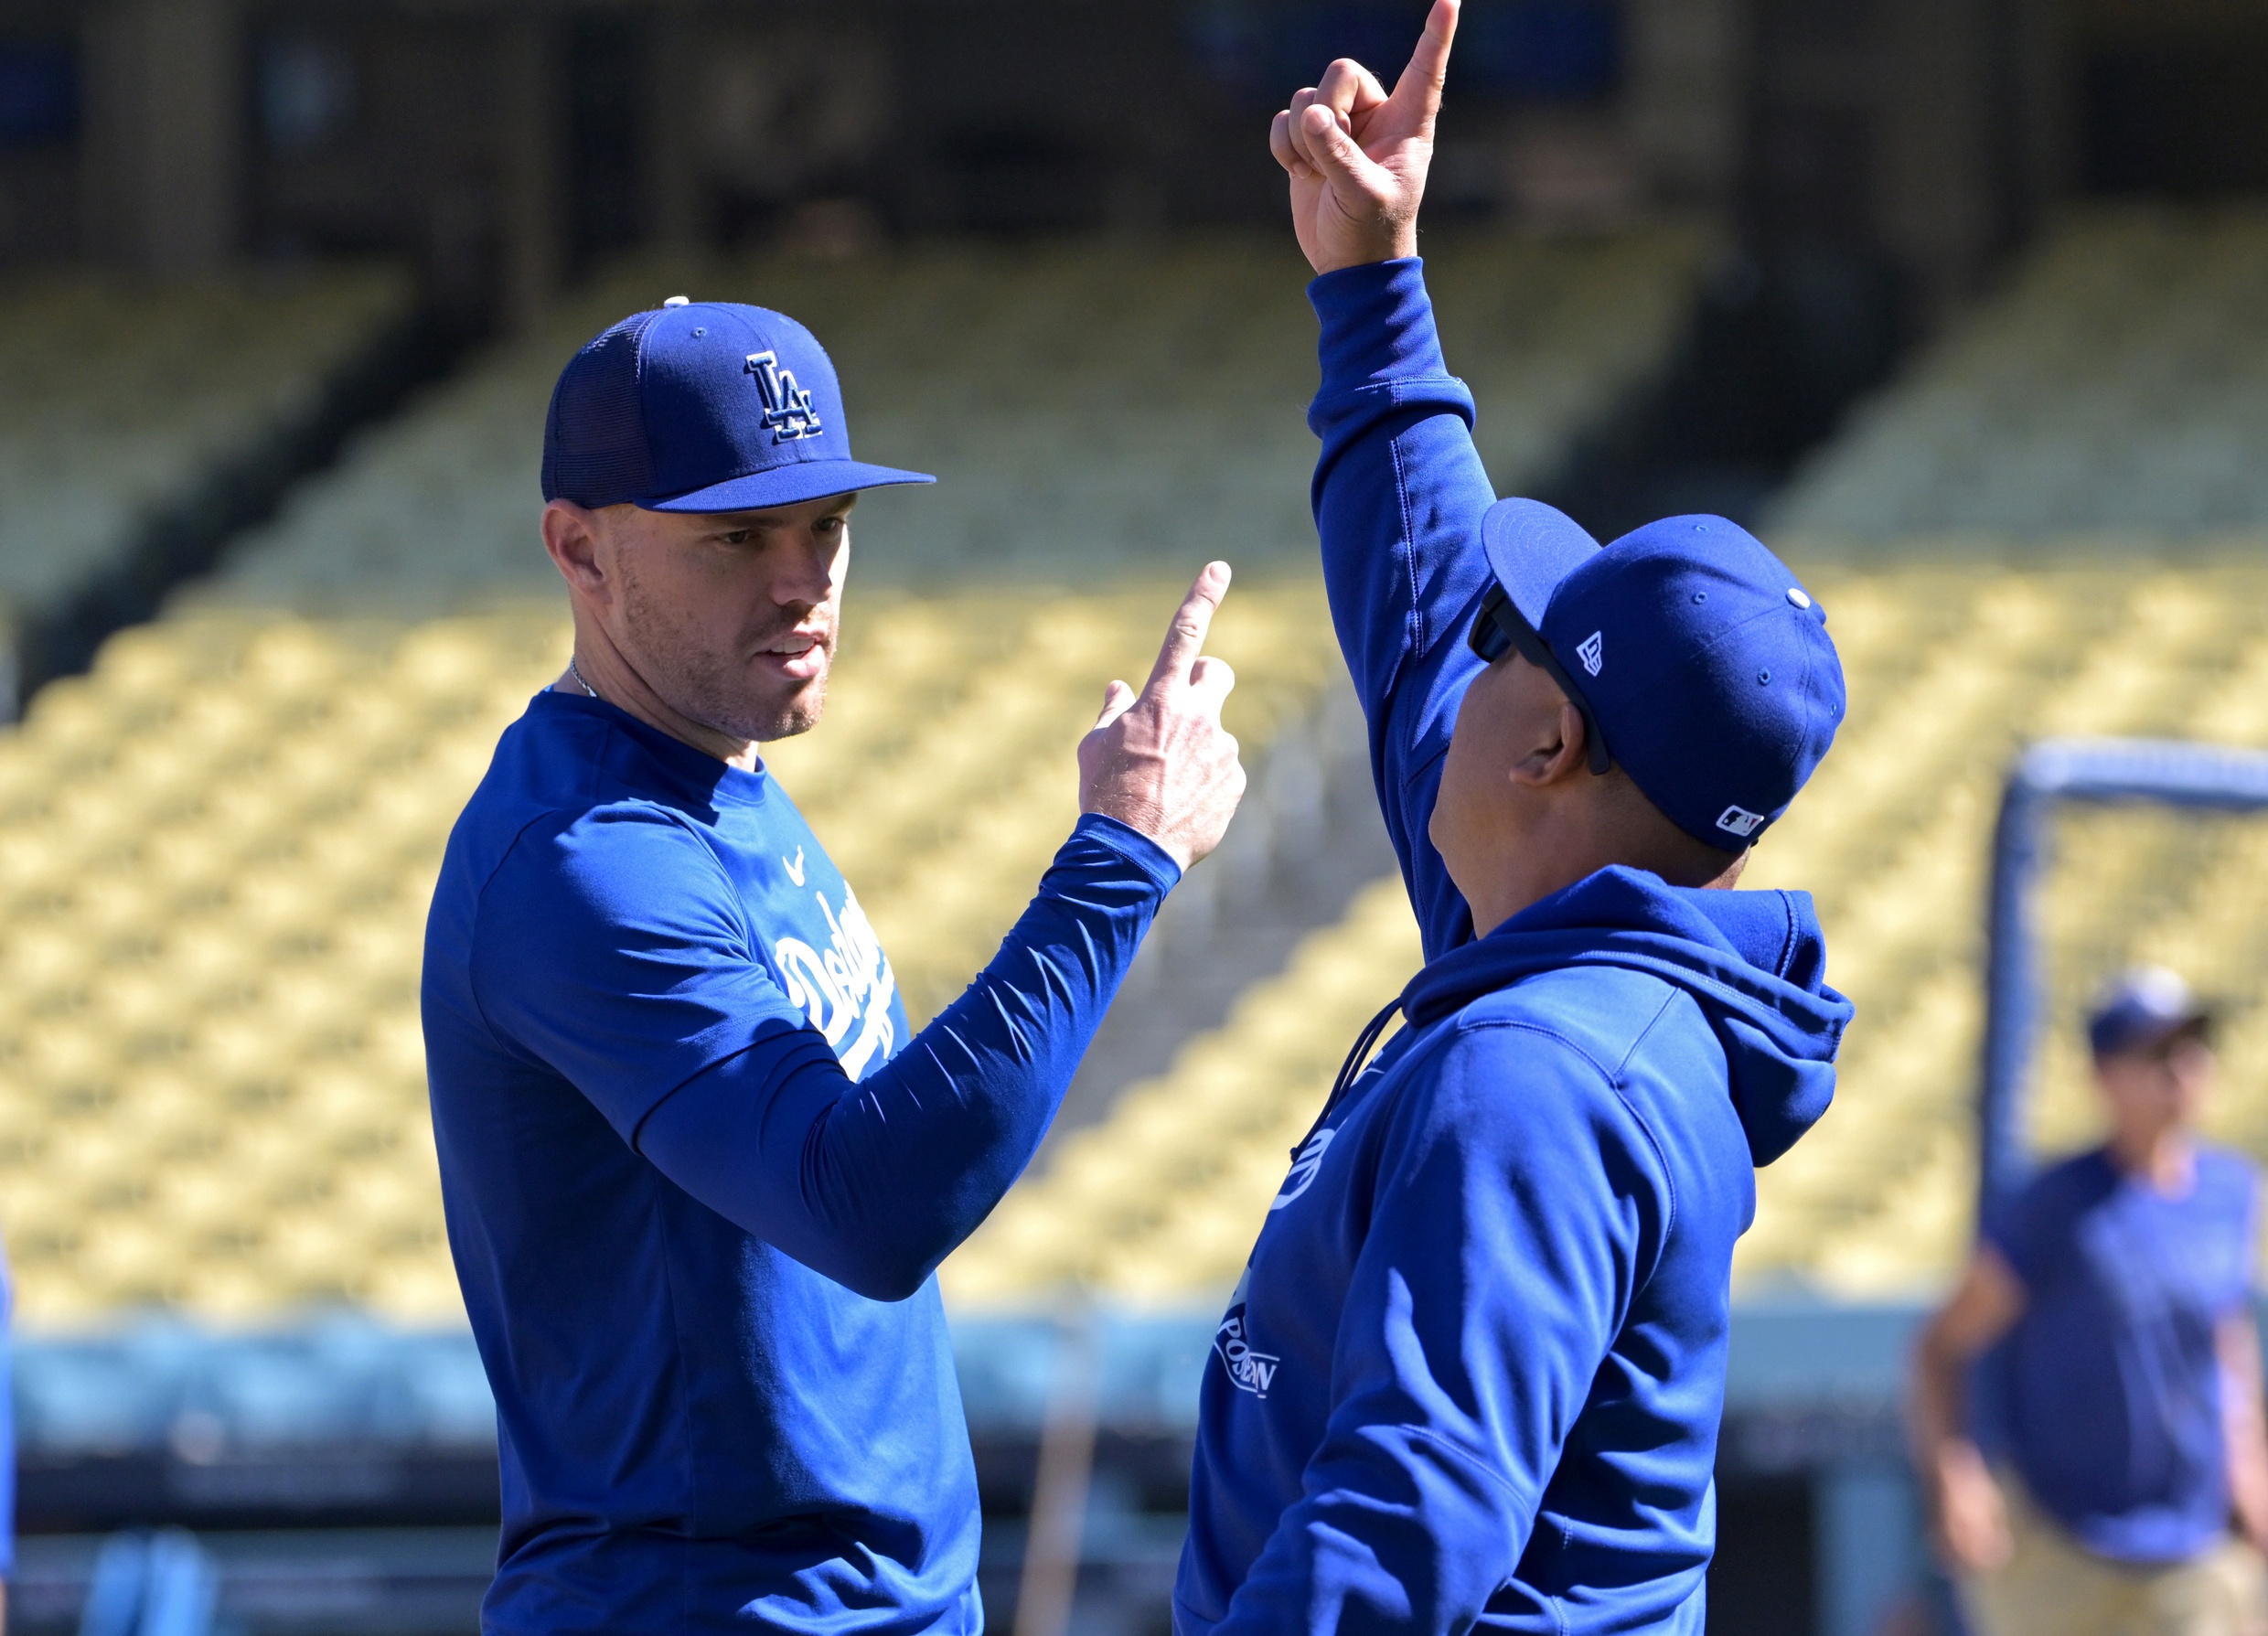 Dodgers News: Dave Roberts Feels Team is Just as Prepared as Last Year ...